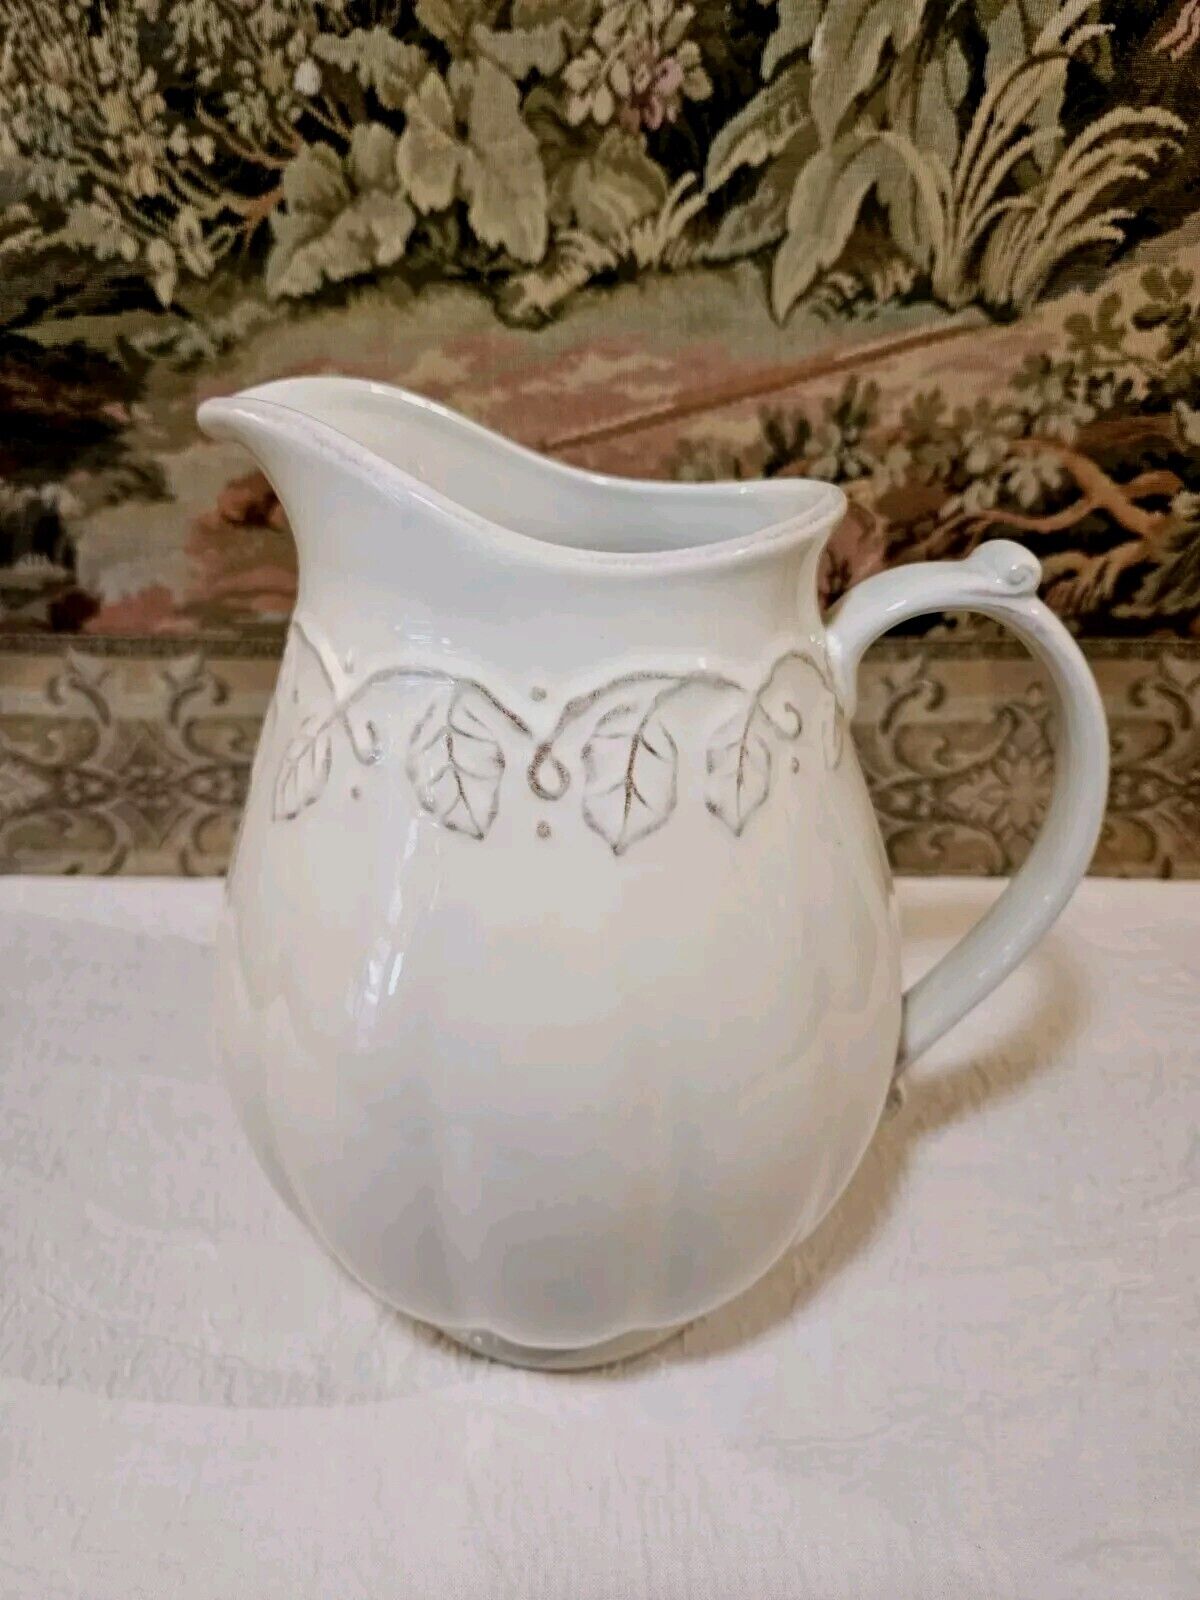 Longaberger Pitcher, Cream Color With Leaves, French Country, Shabby Chic, 2 Qt 